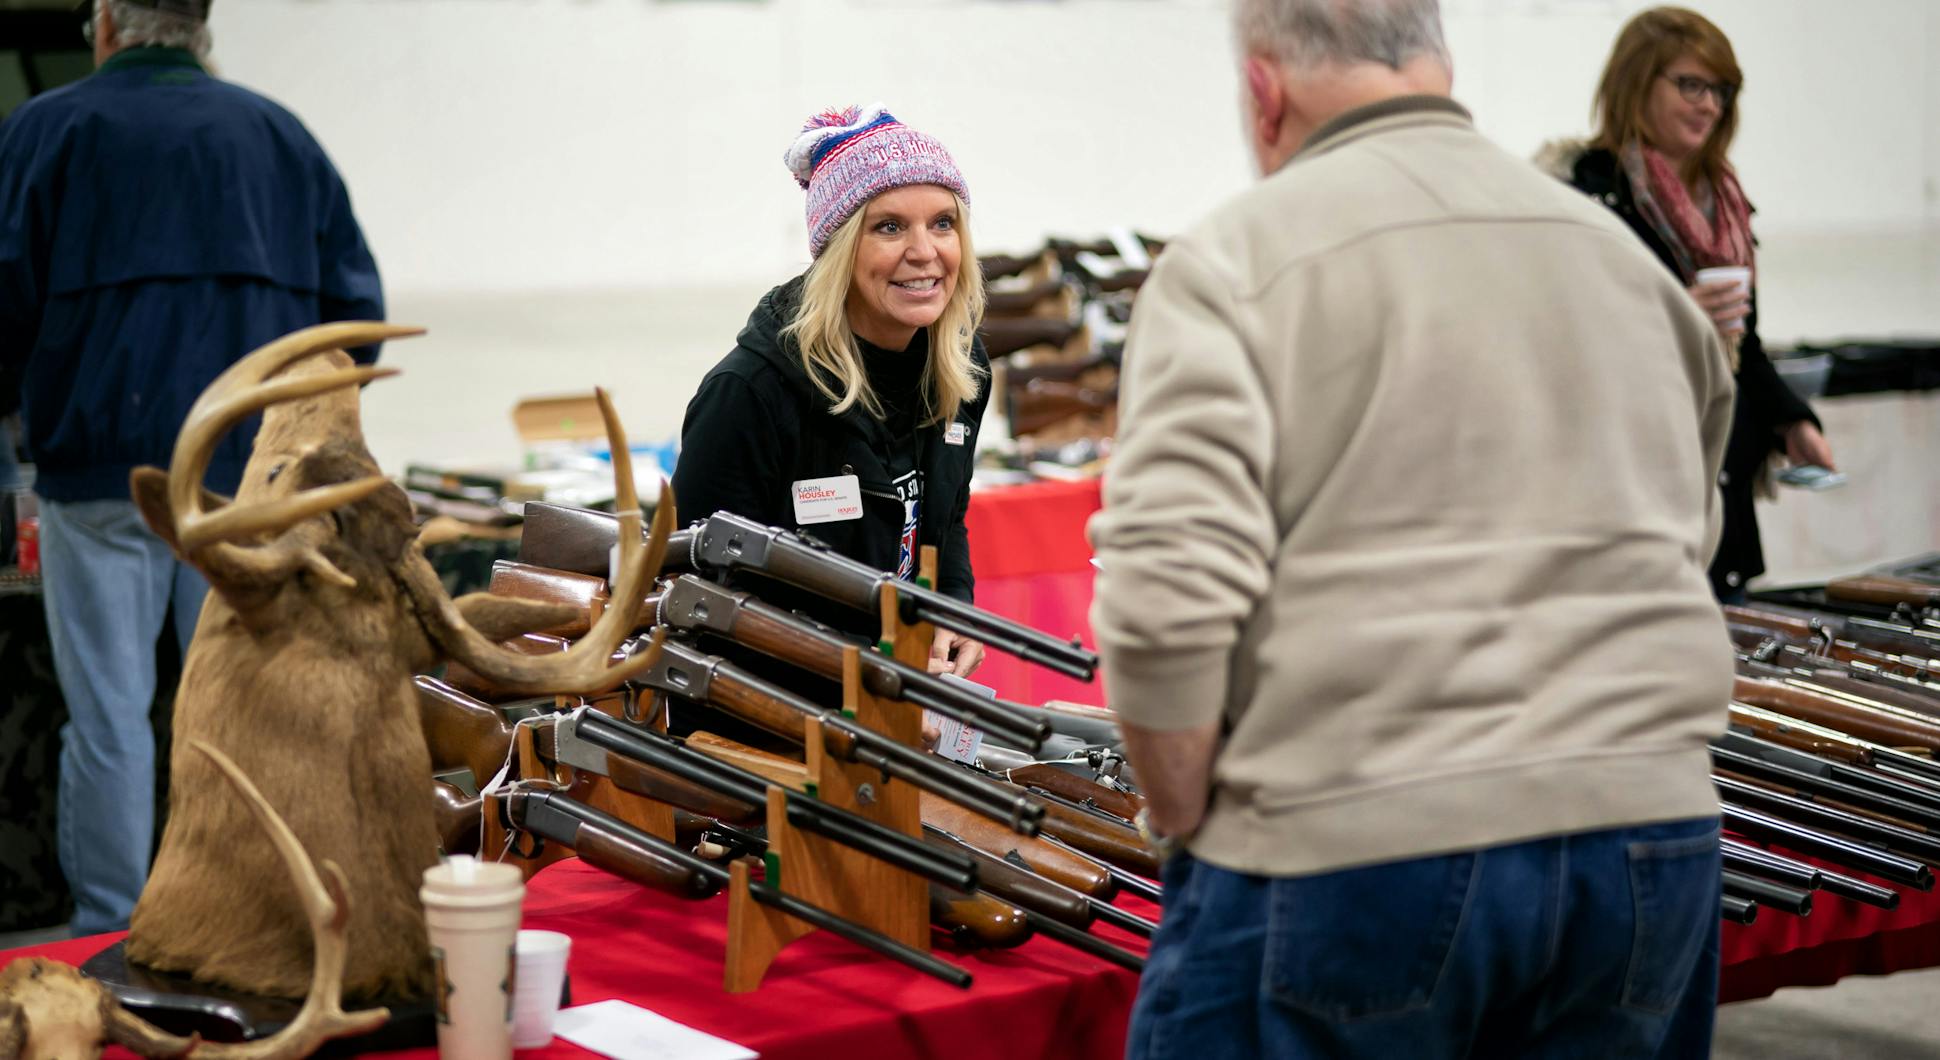 Housley spoke with attendees at a gun show in Eveleth, Minn., on Oct. 6.